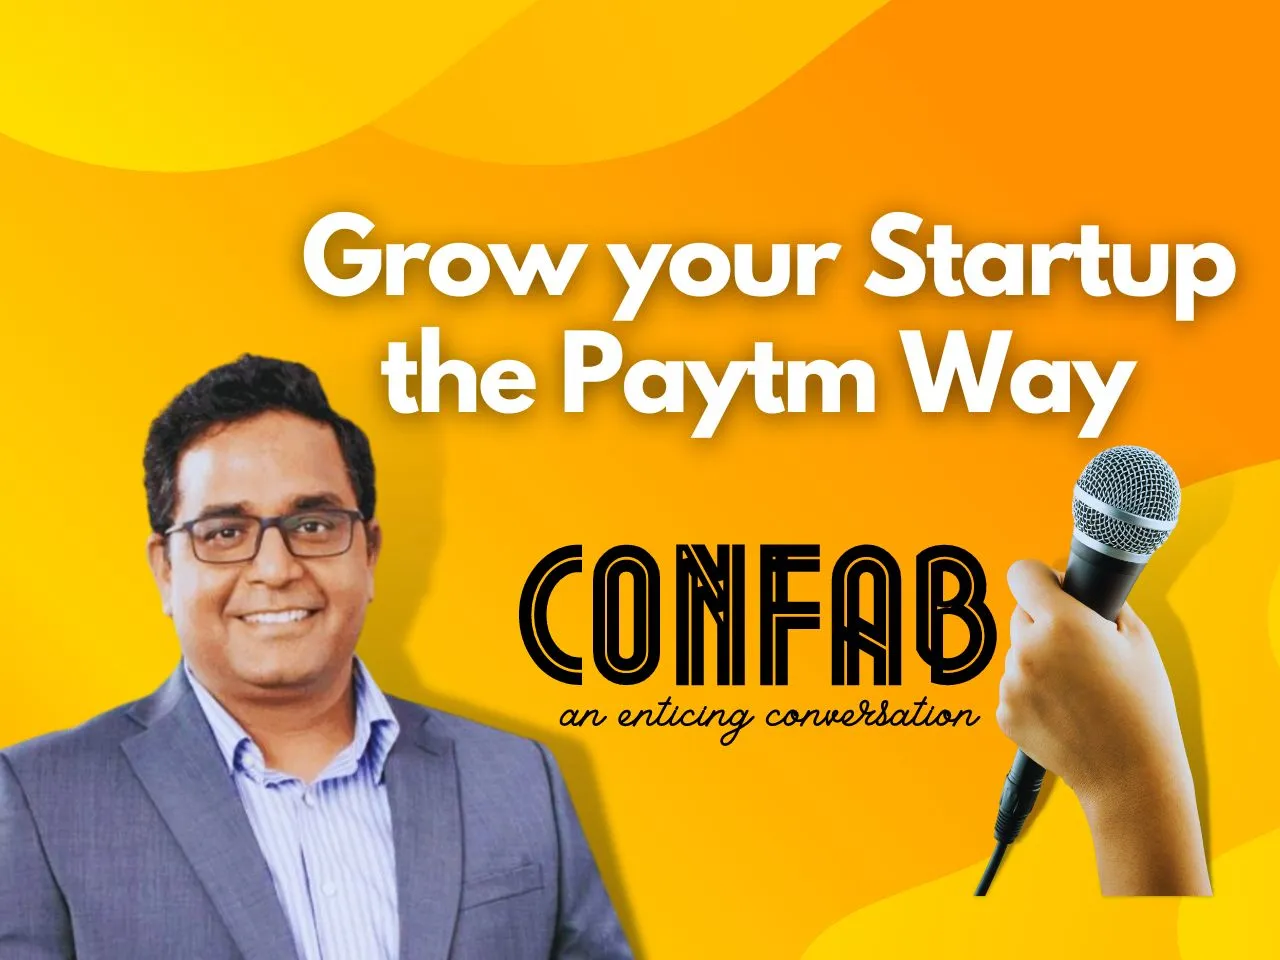 How Paytm became the 'Brahma' of Fintech Space?